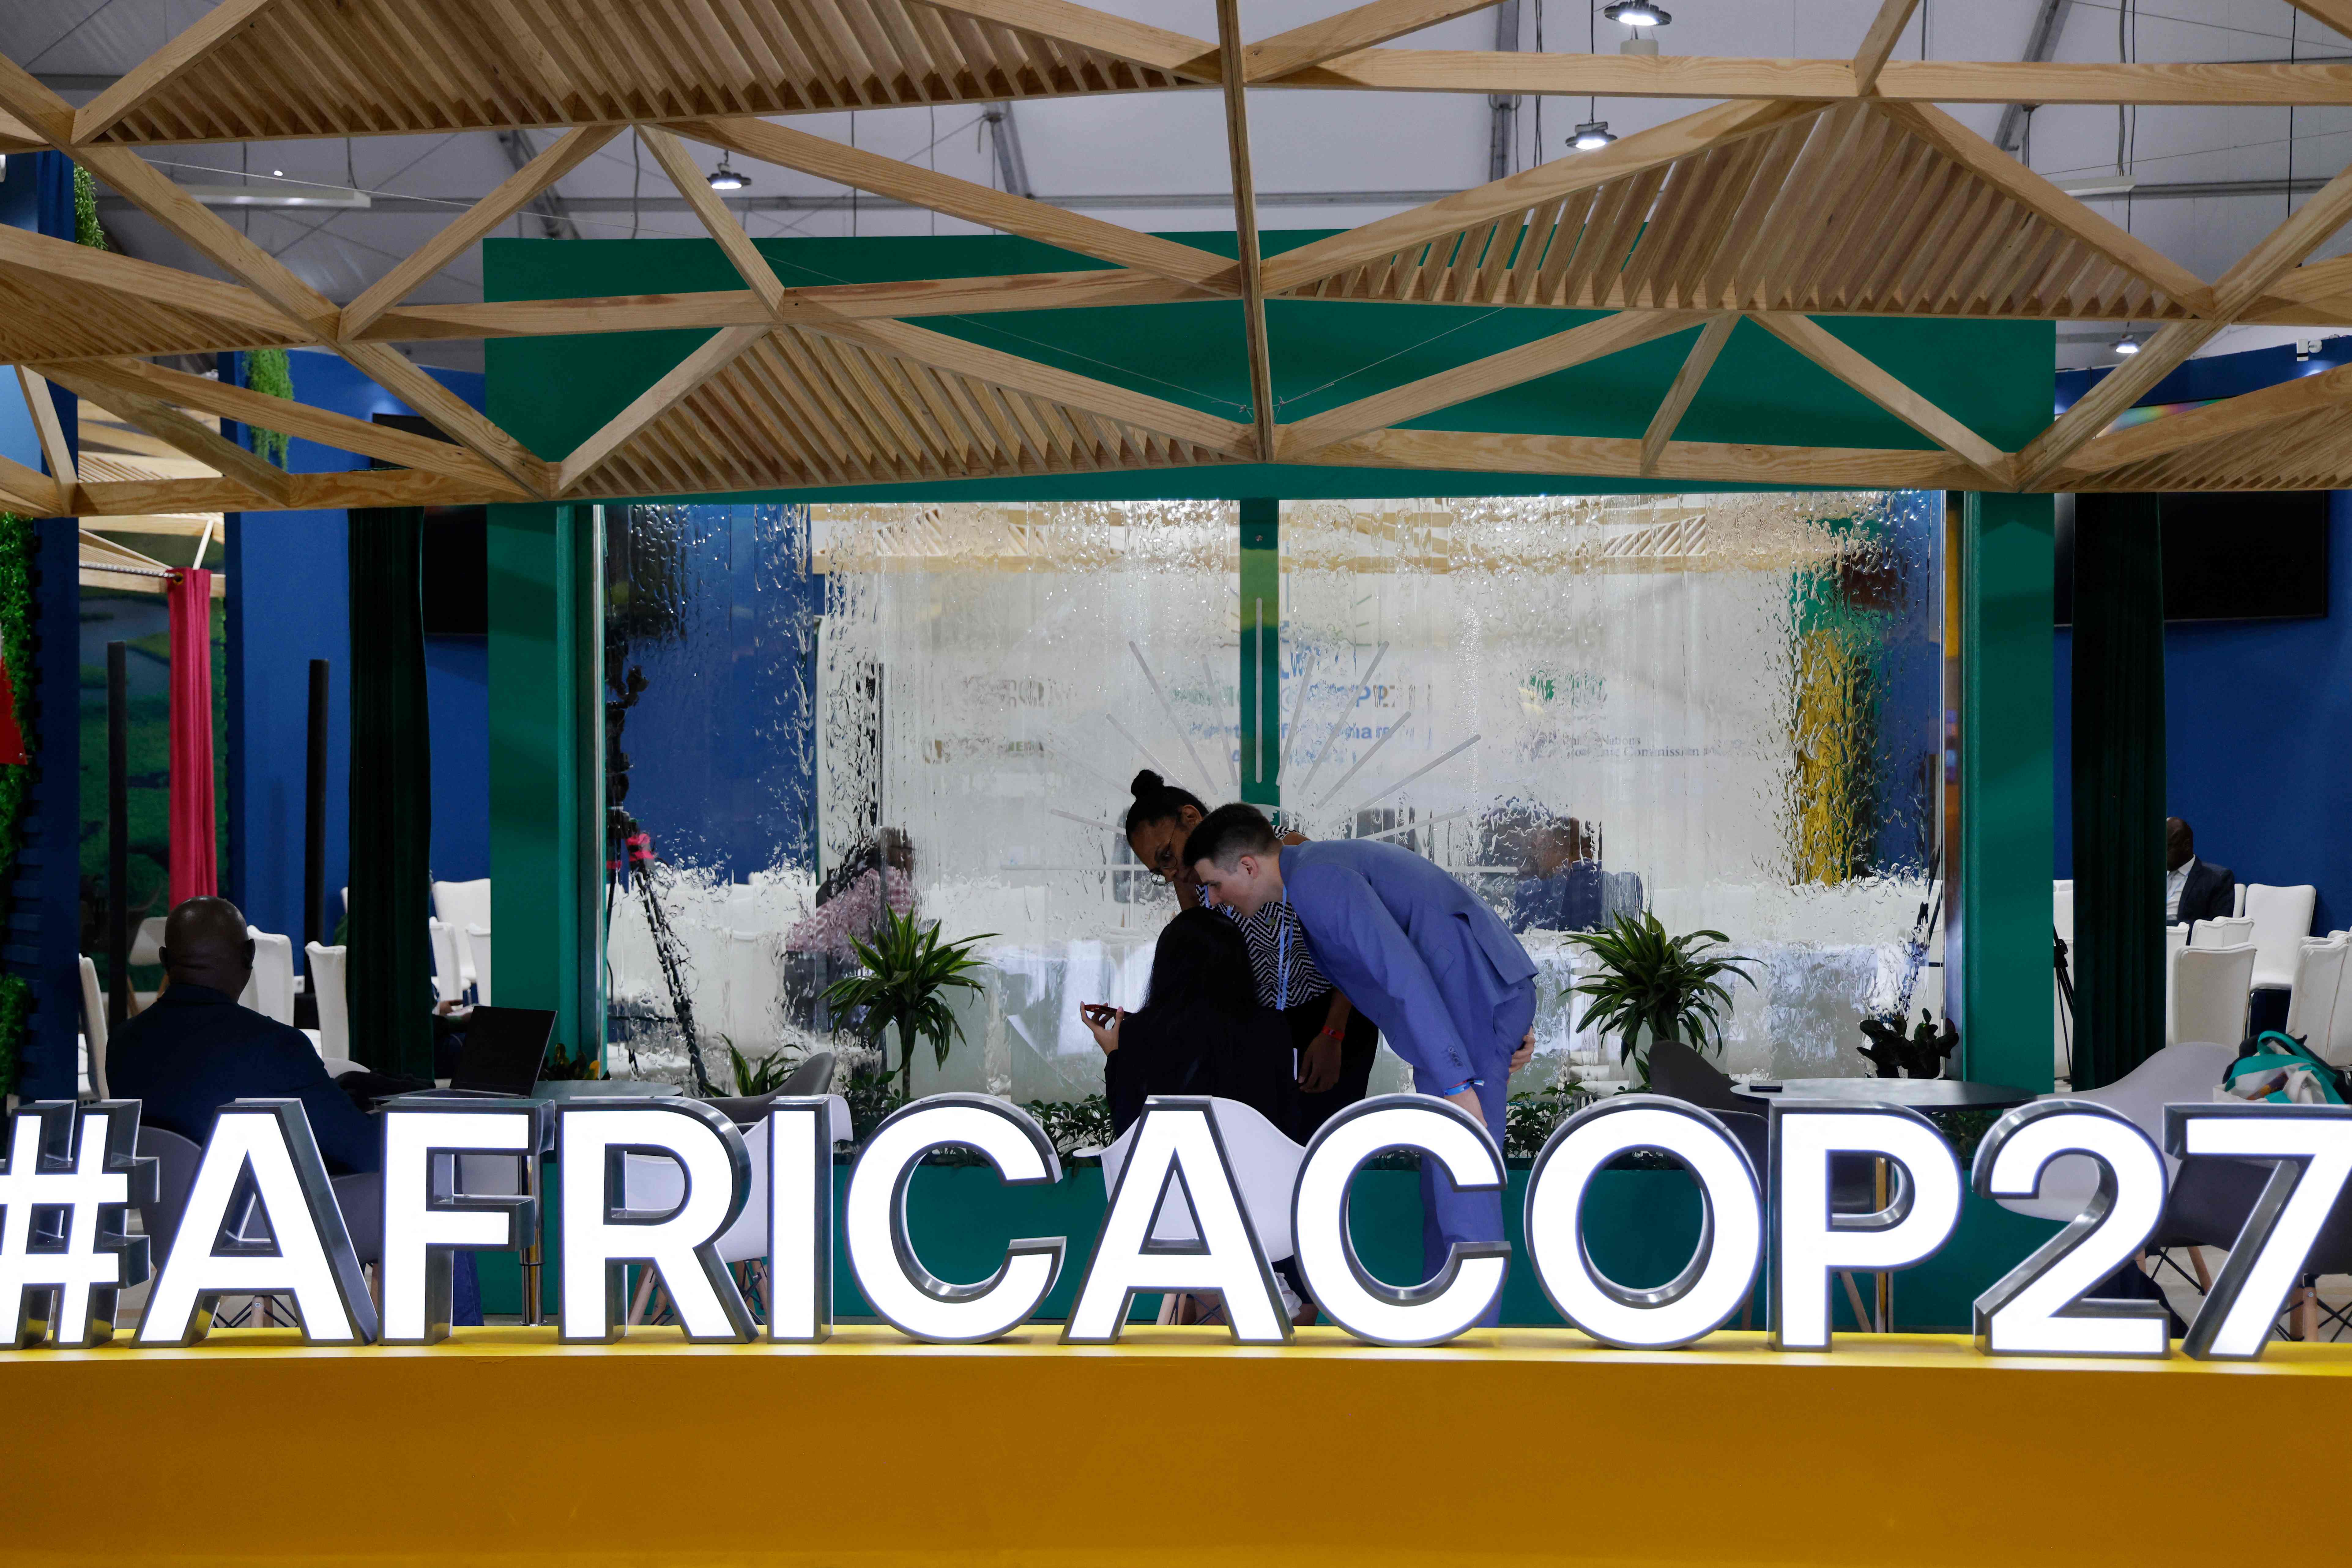 Participants and delegates work in the Africa pavilion at the Sharm El Sheikh International Convention Centre